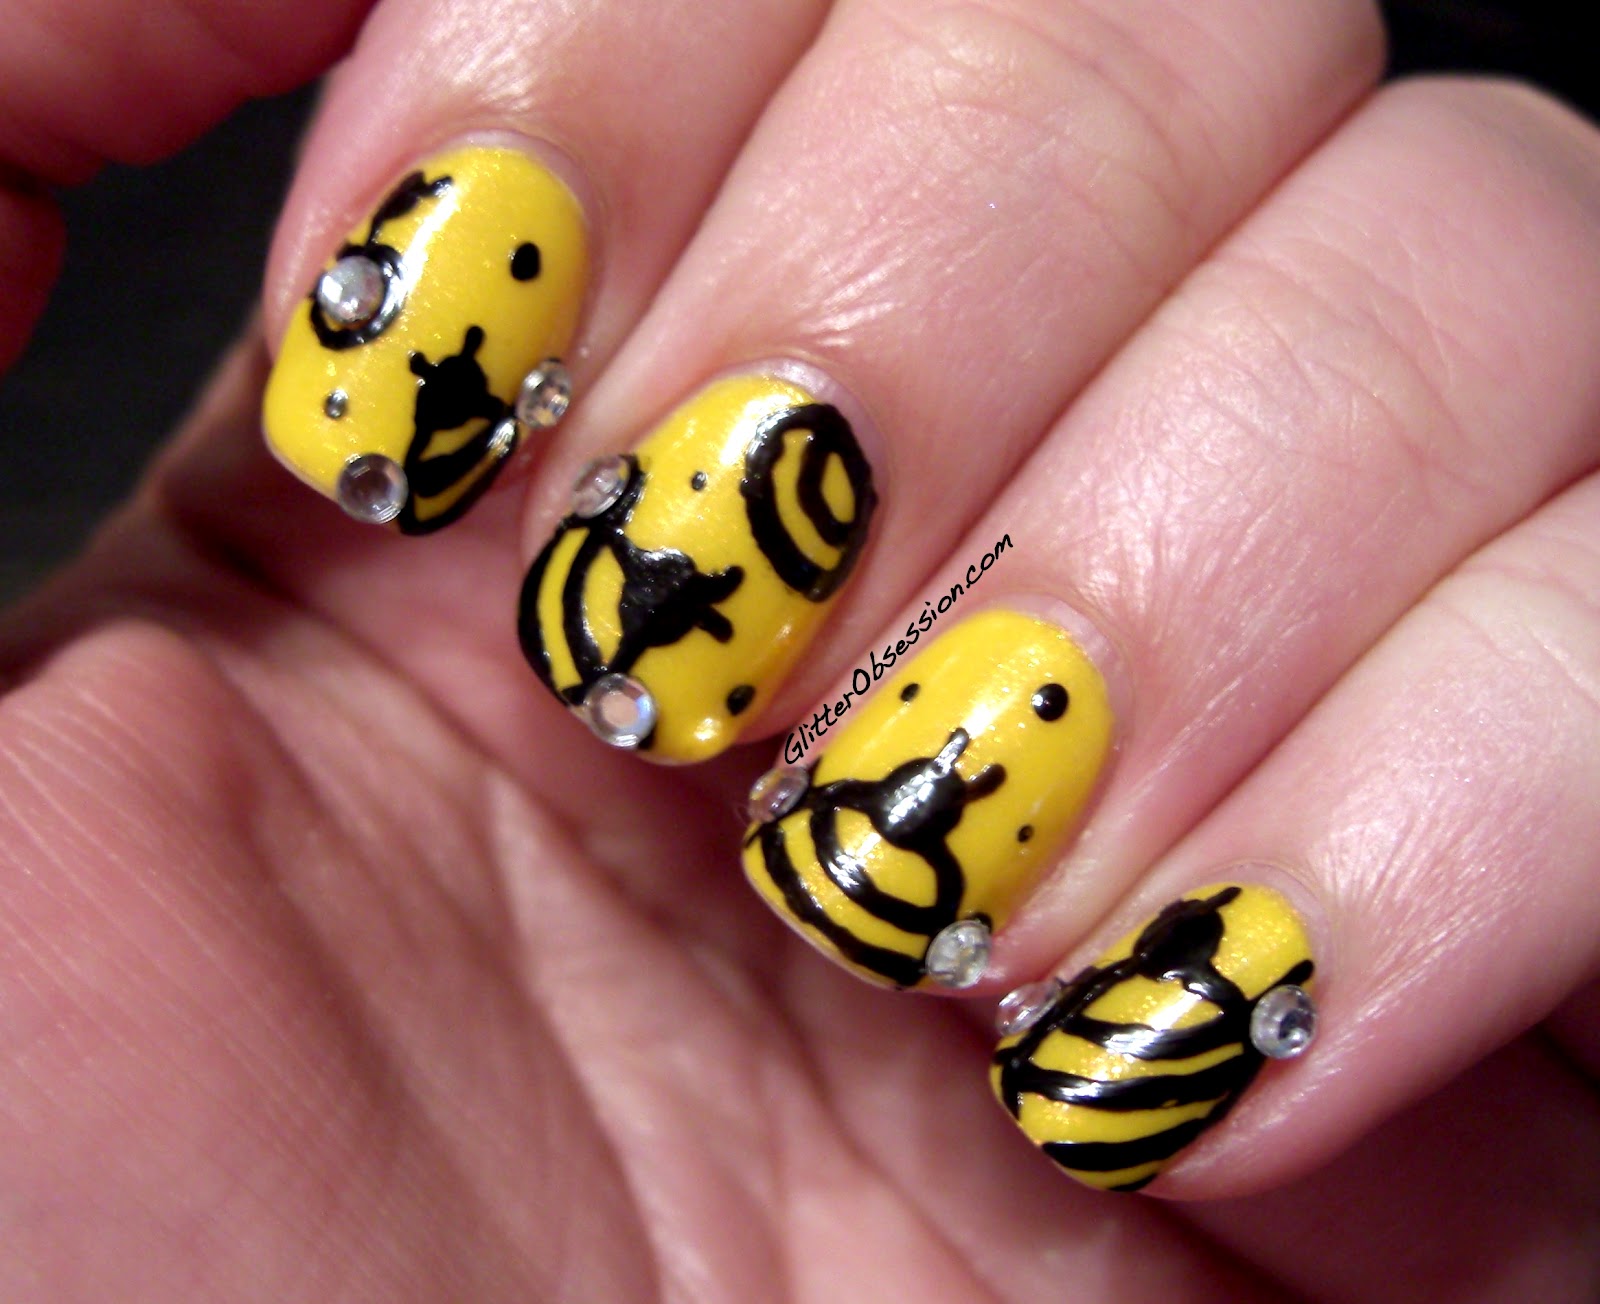 1. Bumble Bee Nail Art Tutorial - wide 10